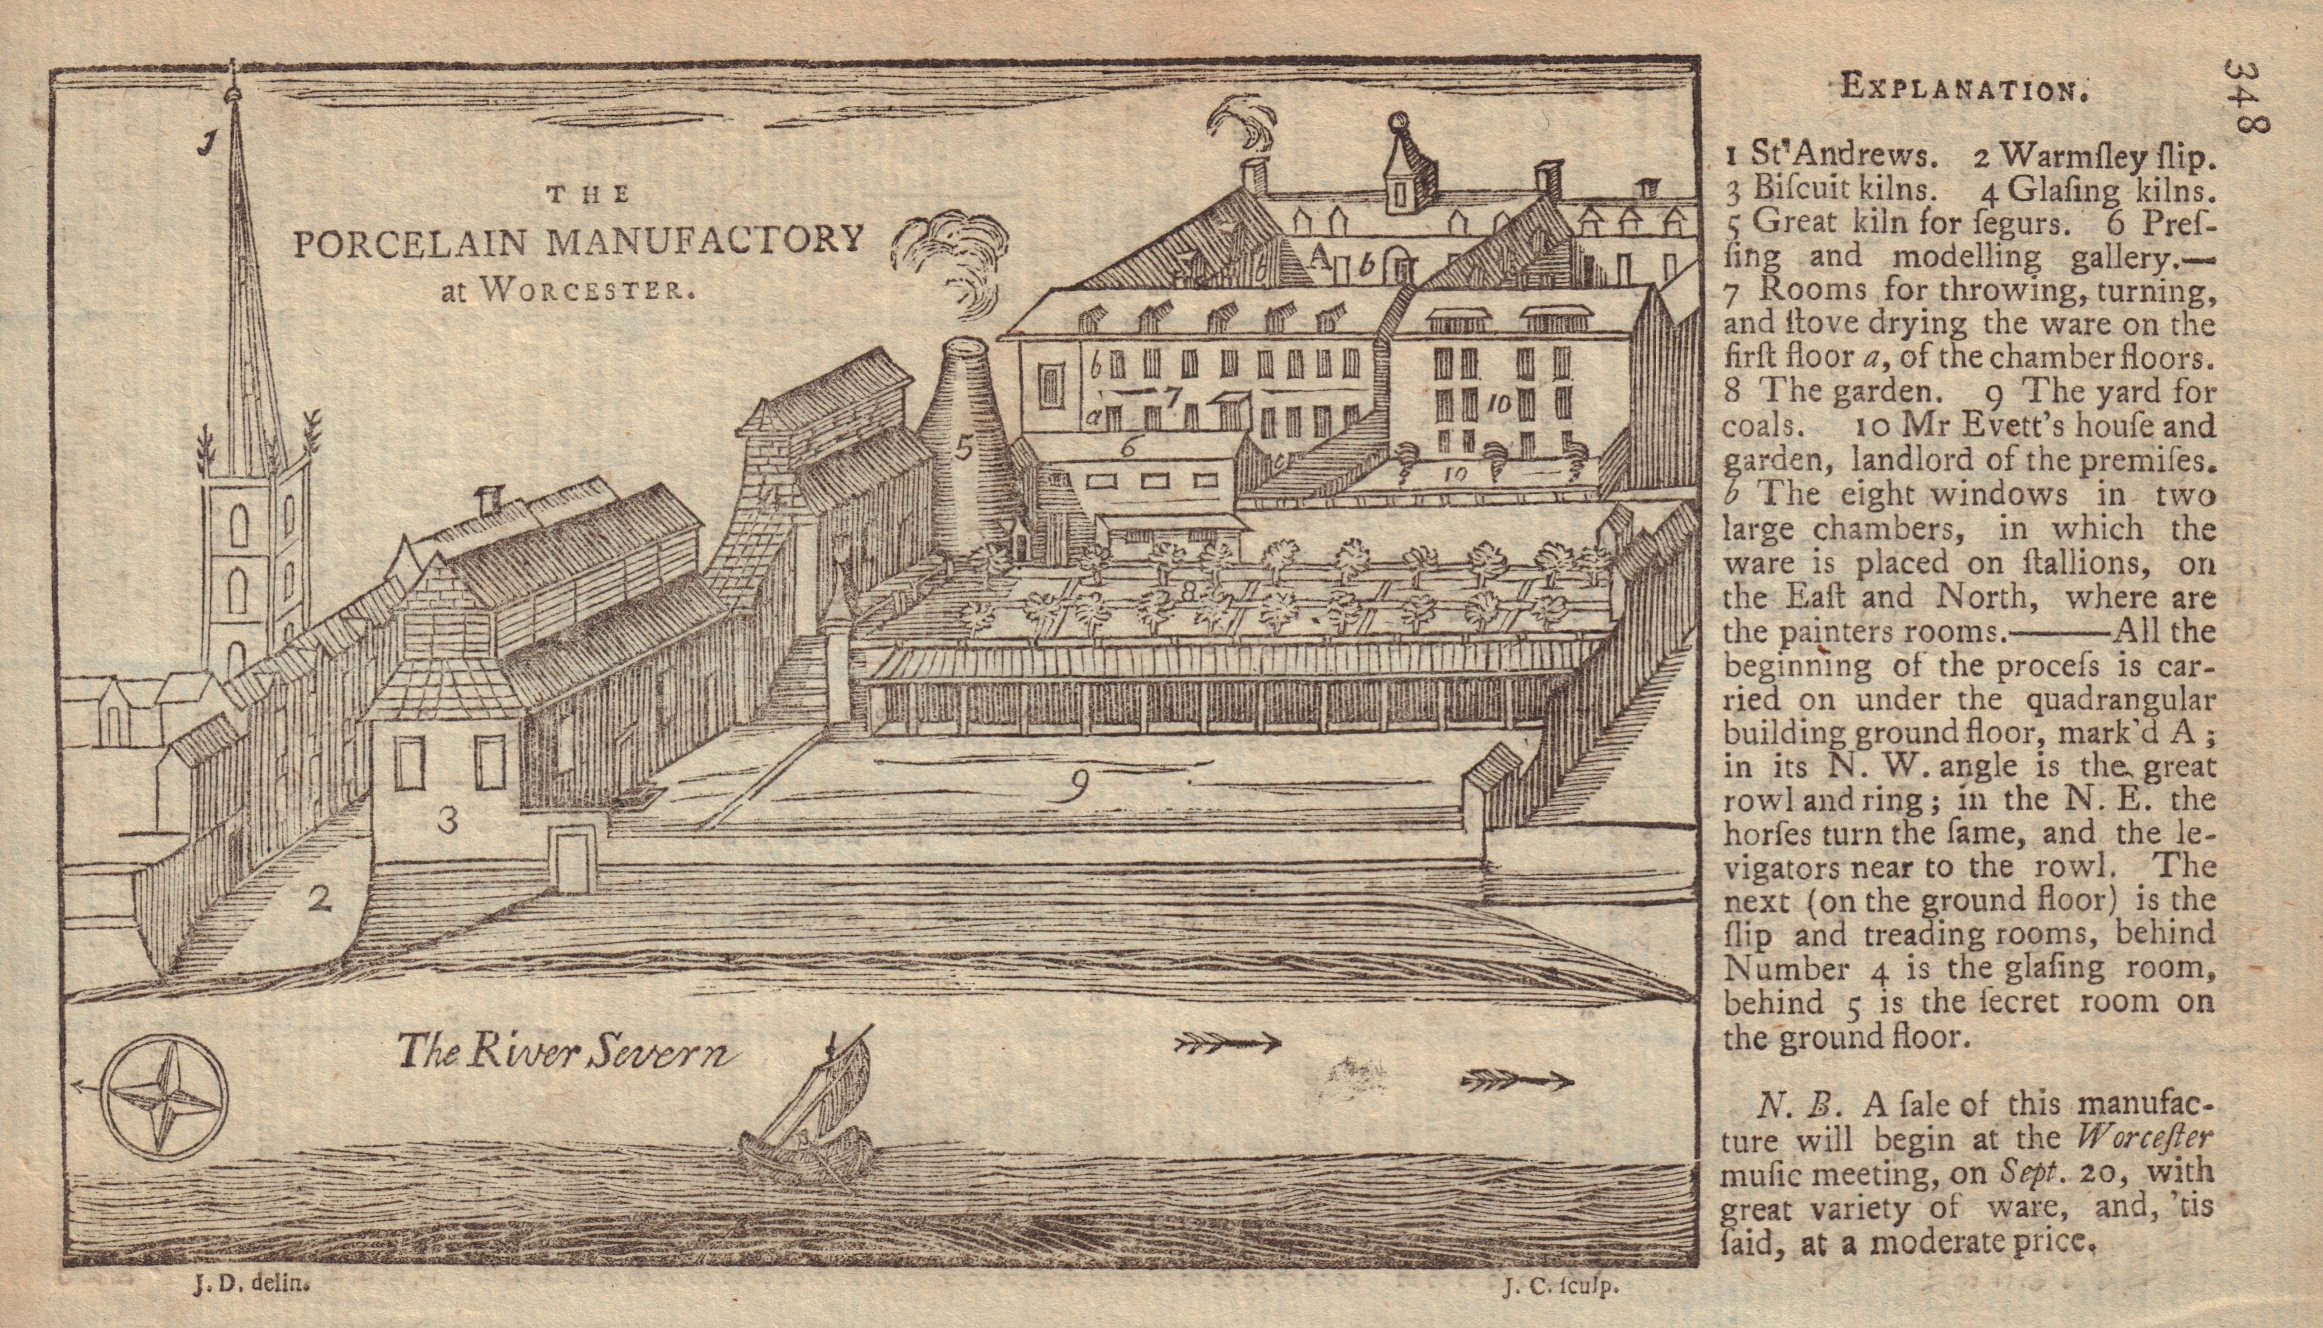 Associate Product The Porcelain Manufactory at Worcester. St. Andrews church. GENTS MAG 1752